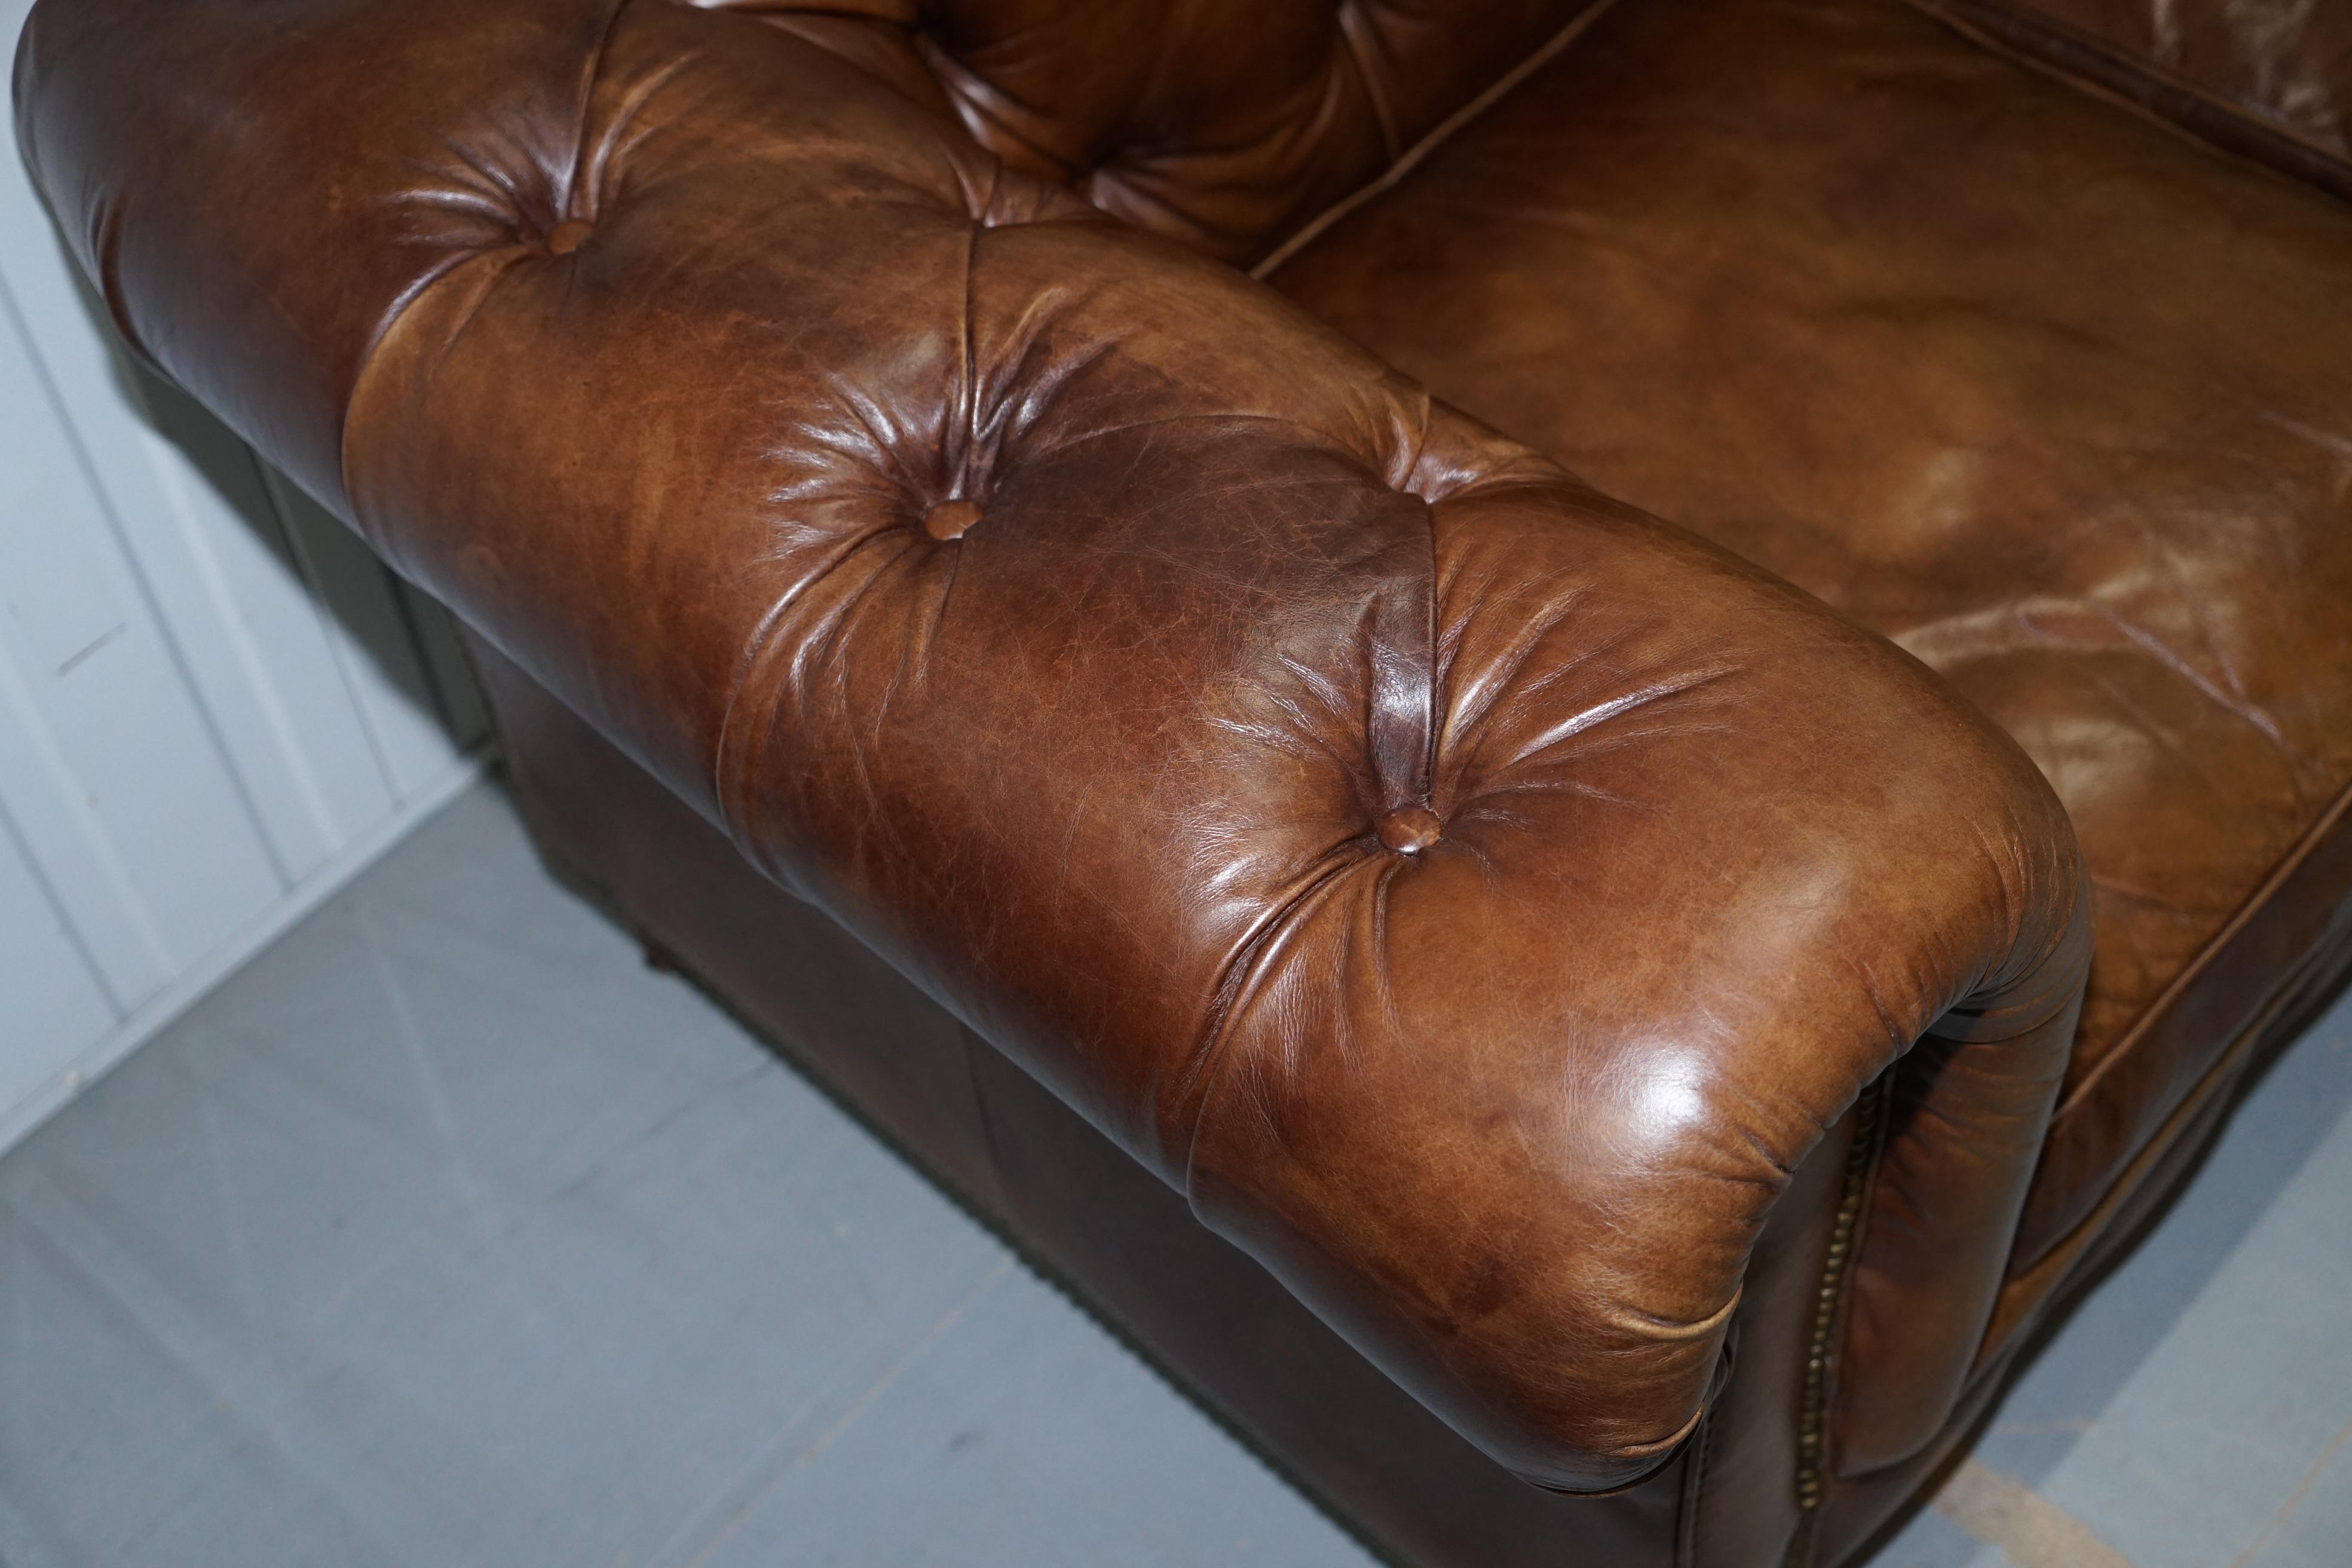 1 of 2 Timothy Oulton Halo Westminster Brown Leather Chesterfield Sofas 2